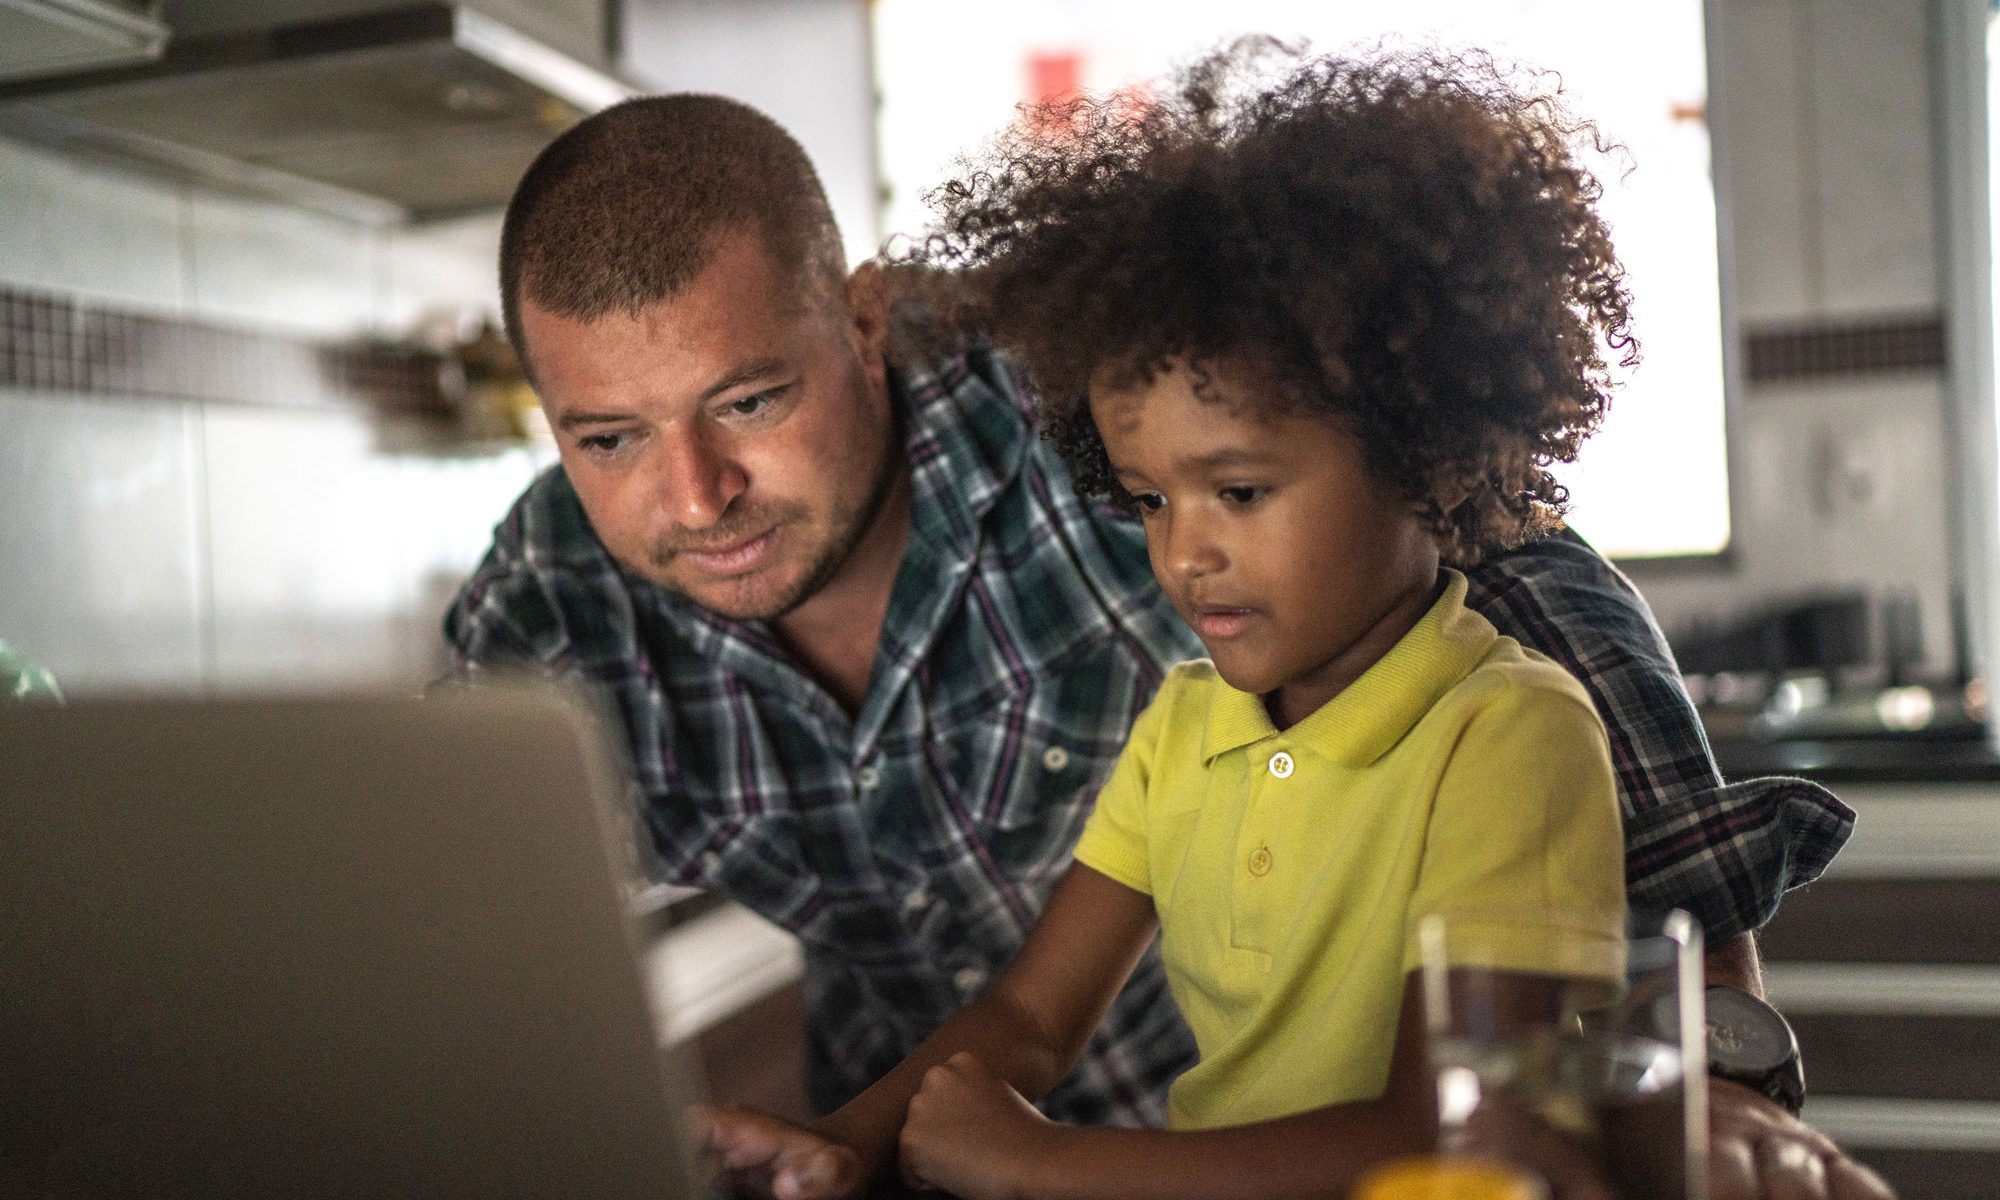 Father helps child with homework on laptop